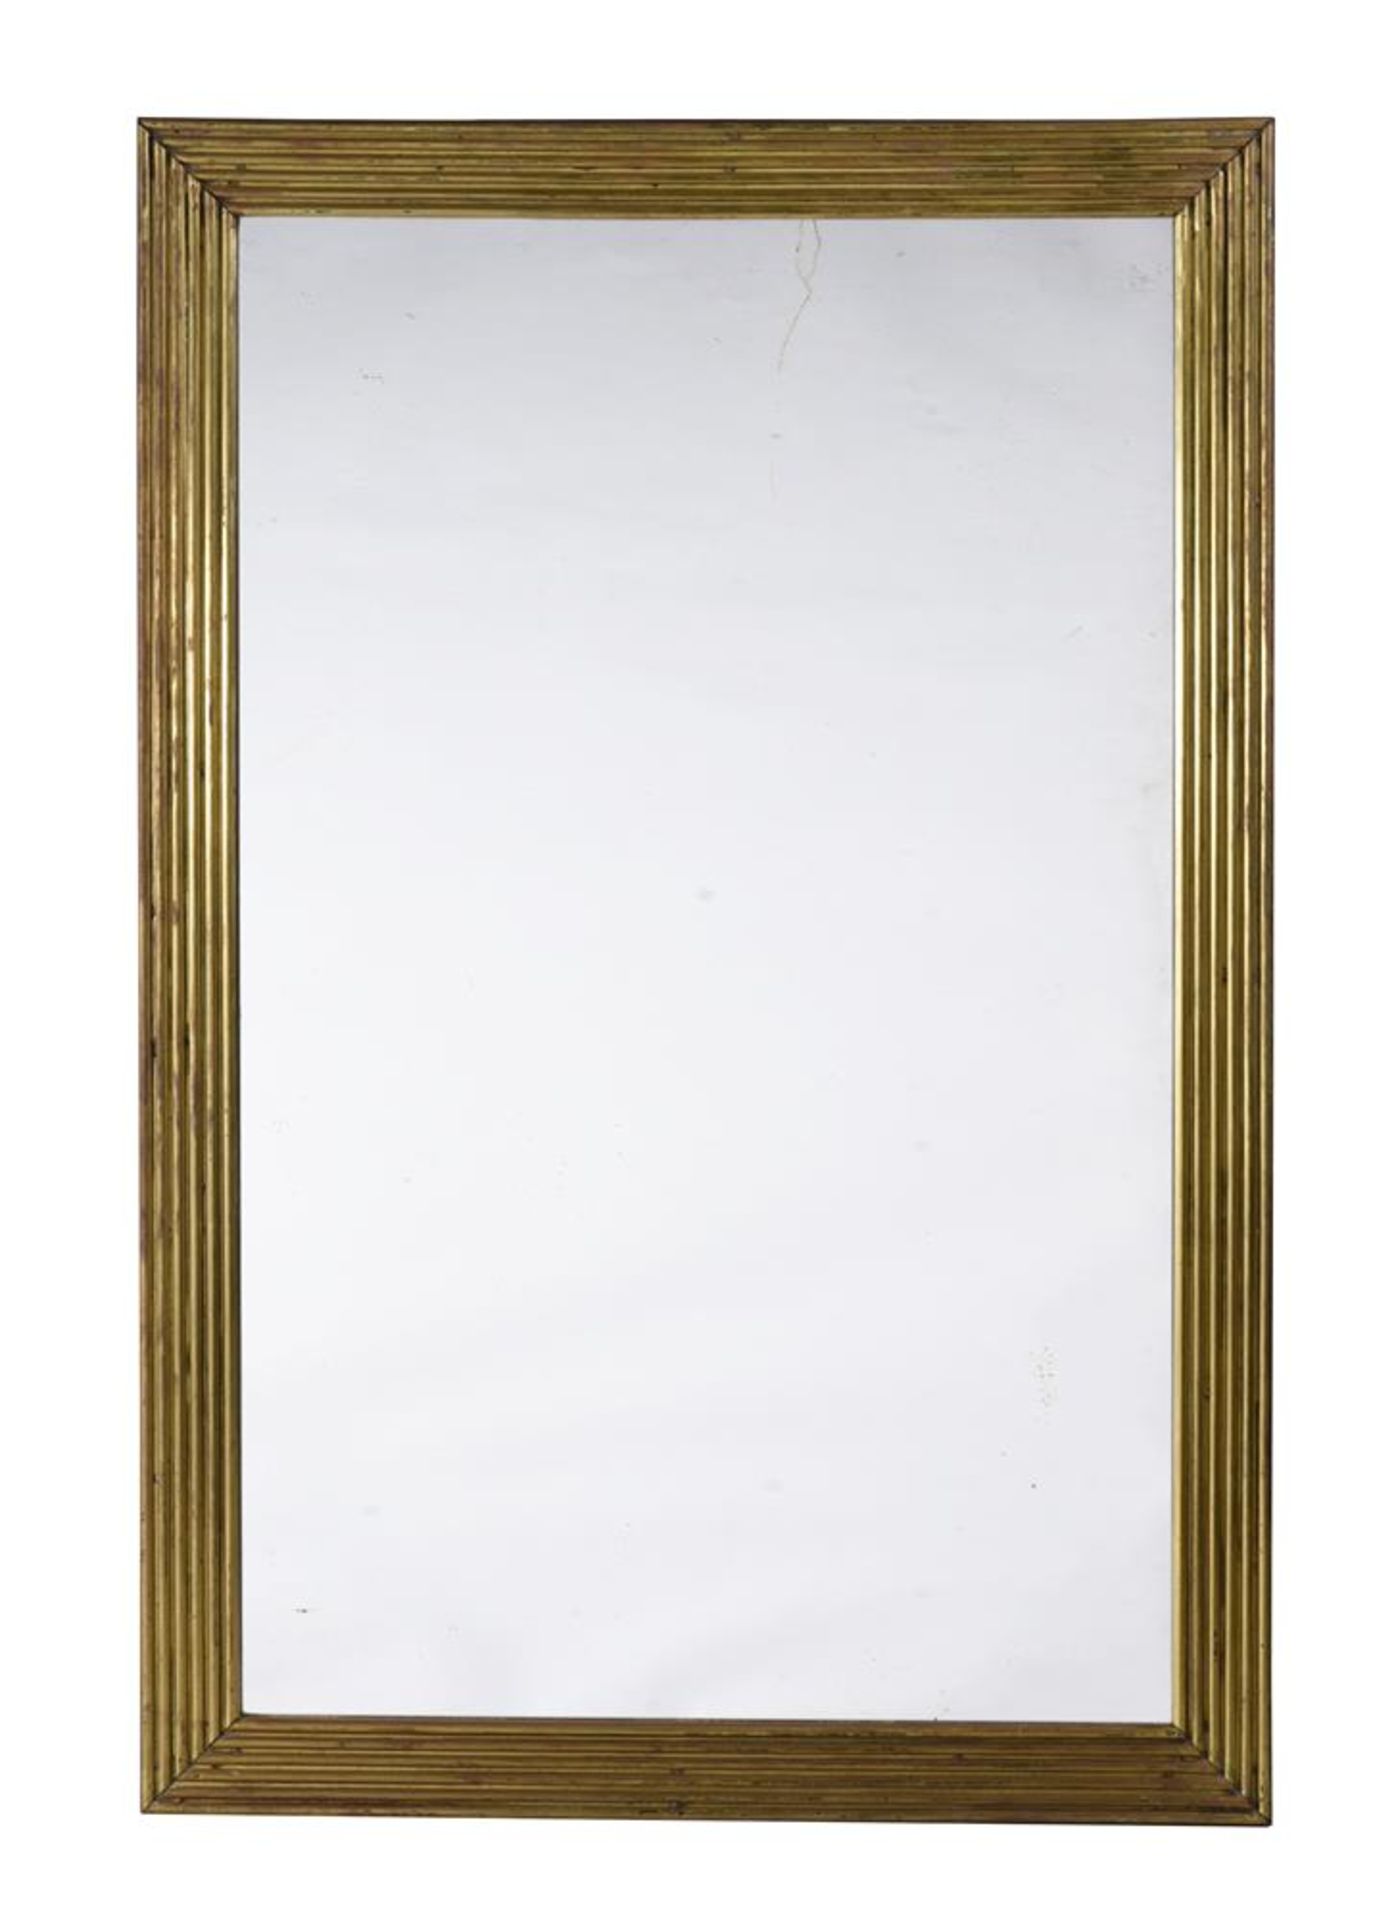 A PAIR OF LARGE BRASS CAFE MIRRORS, LATE 19TH/EARLY 20TH CENTURY - Image 2 of 5